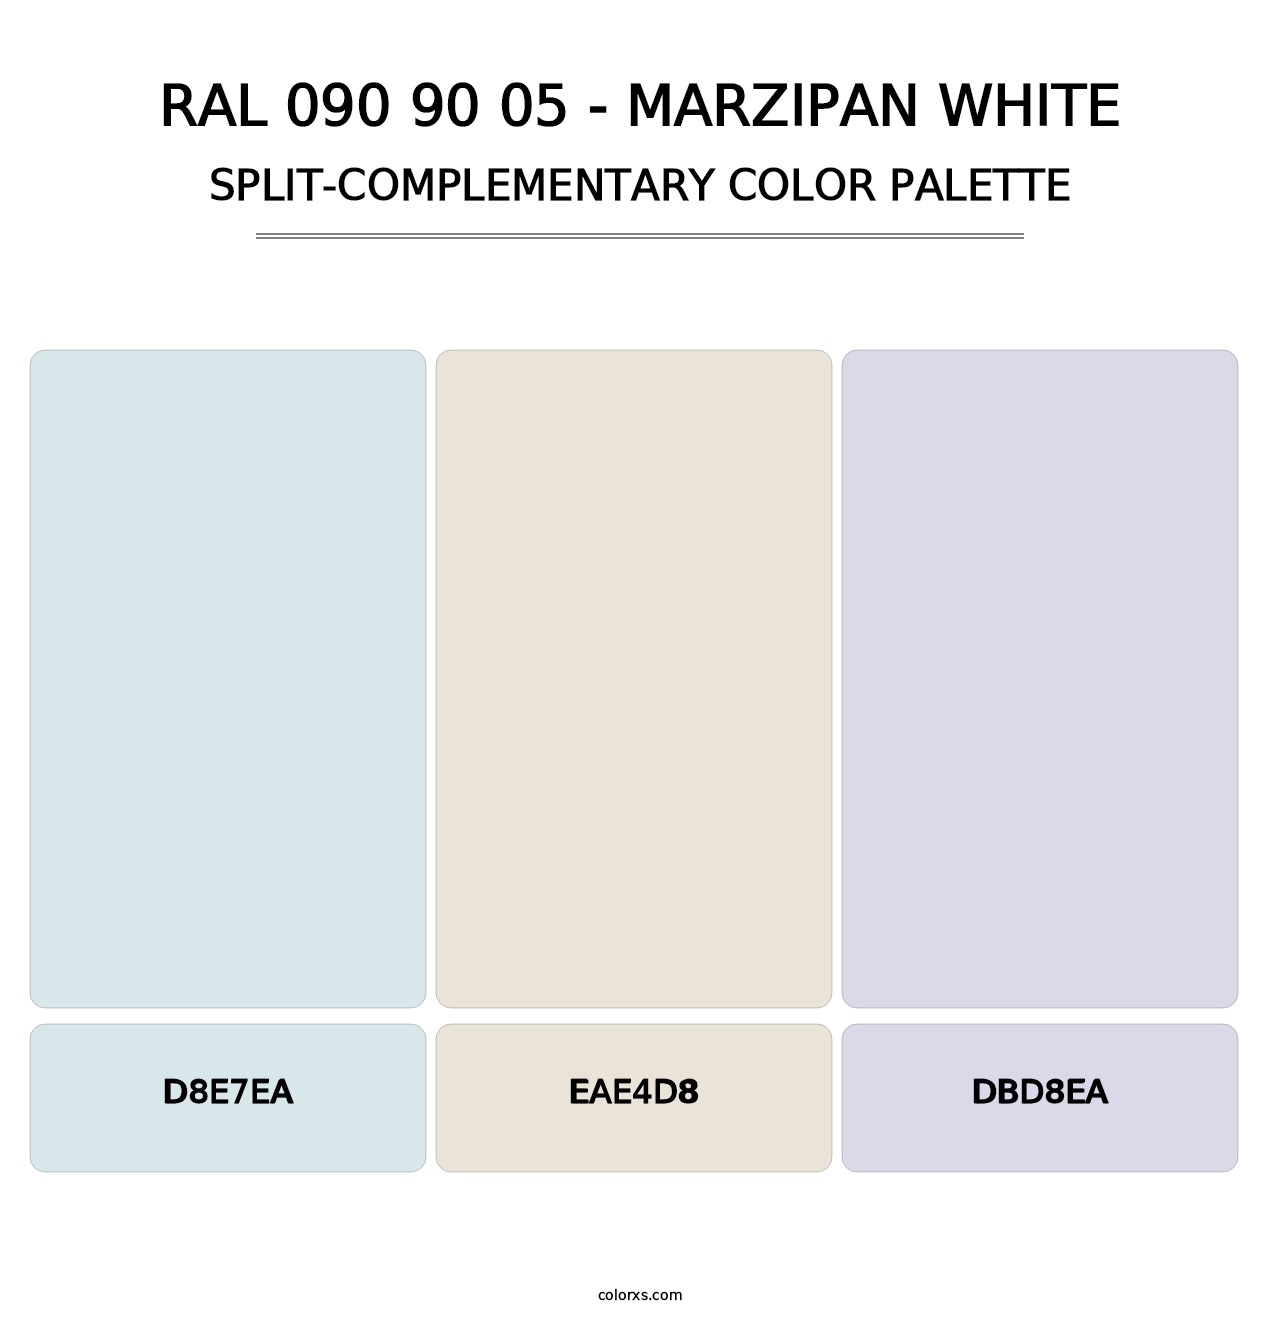 RAL 090 90 05 - Marzipan White - Split-Complementary Color Palette